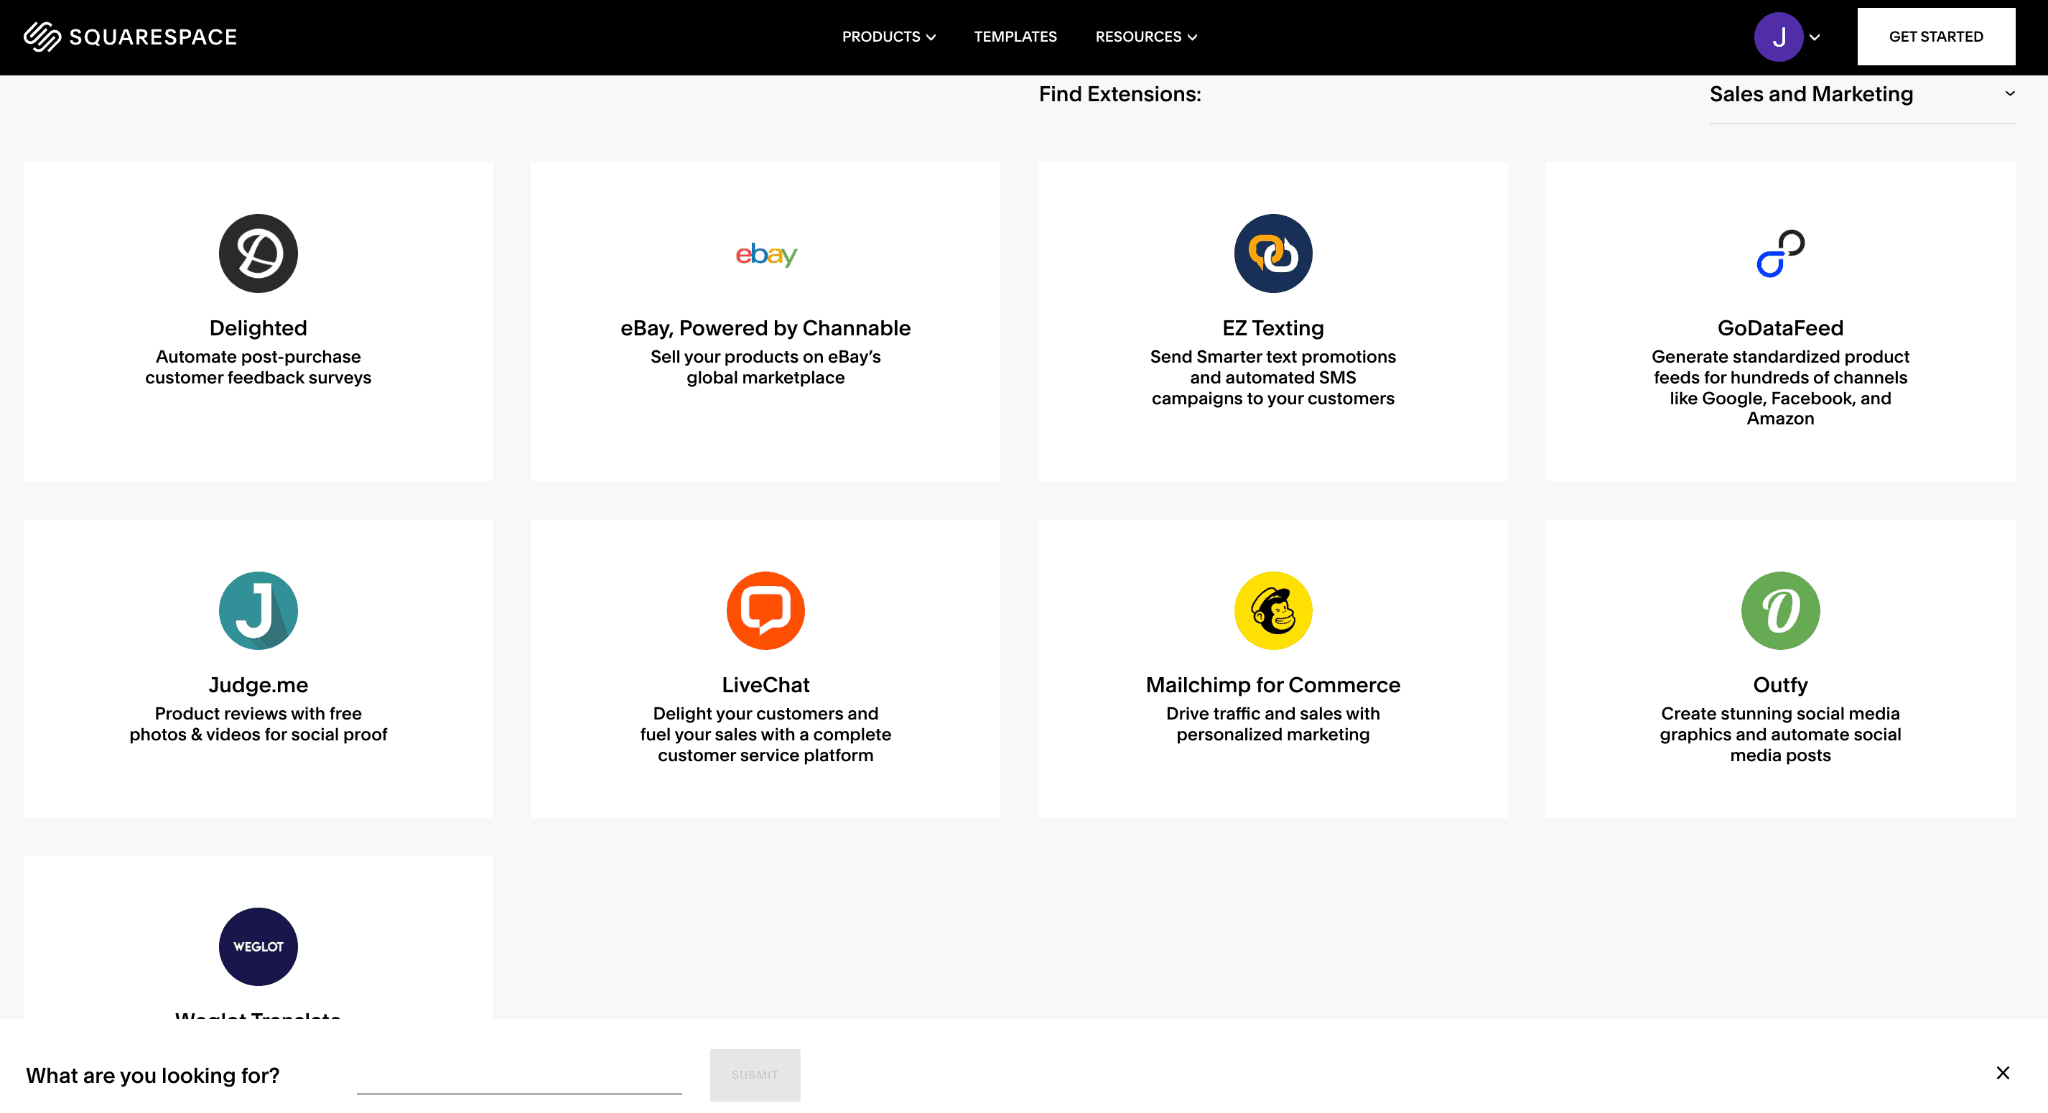 Squarespace apps